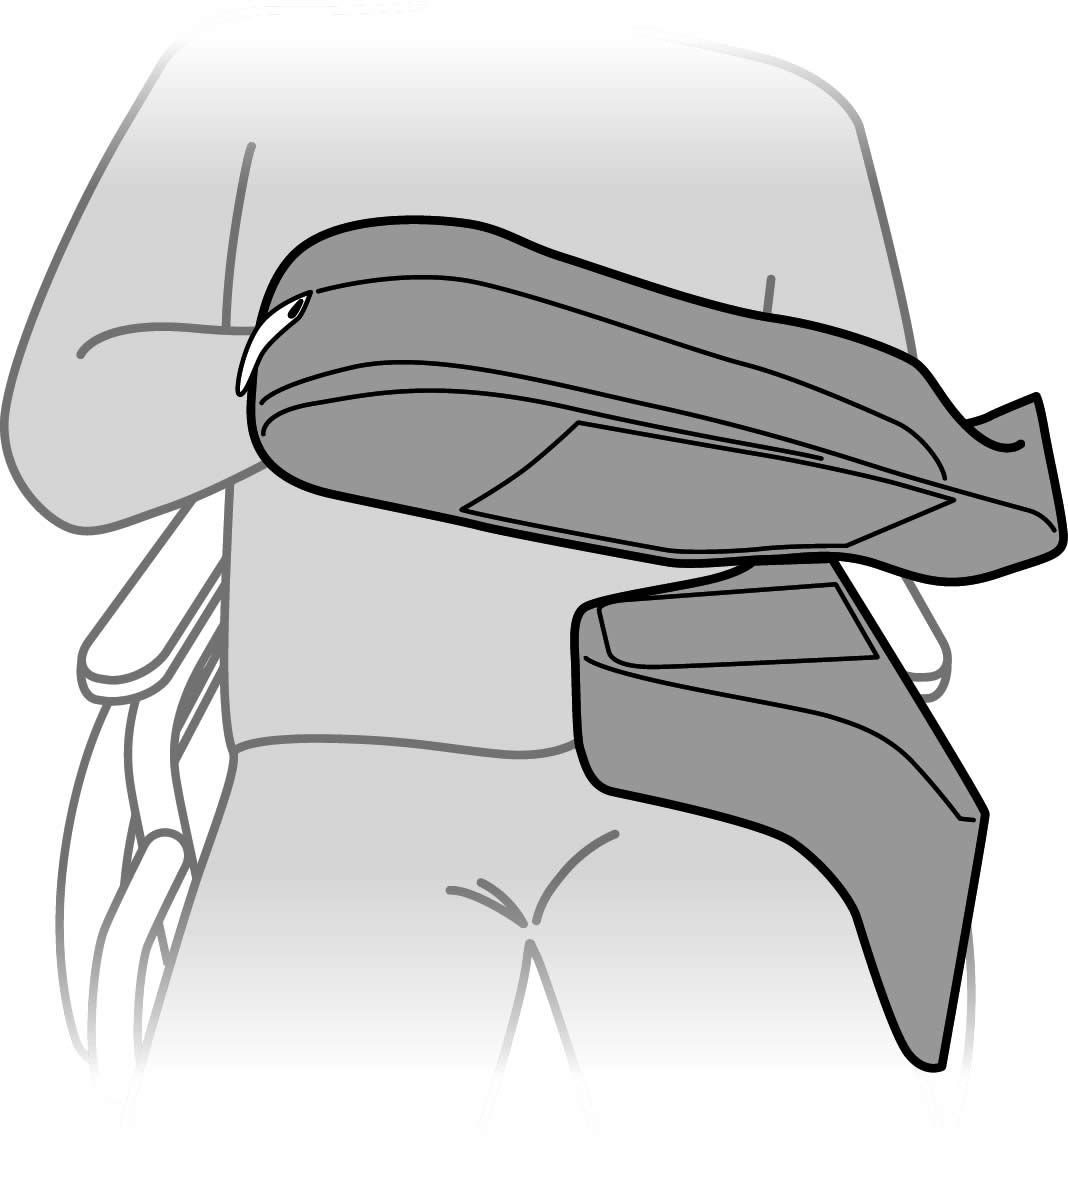 System upper limb positioning wedge block groove and zone